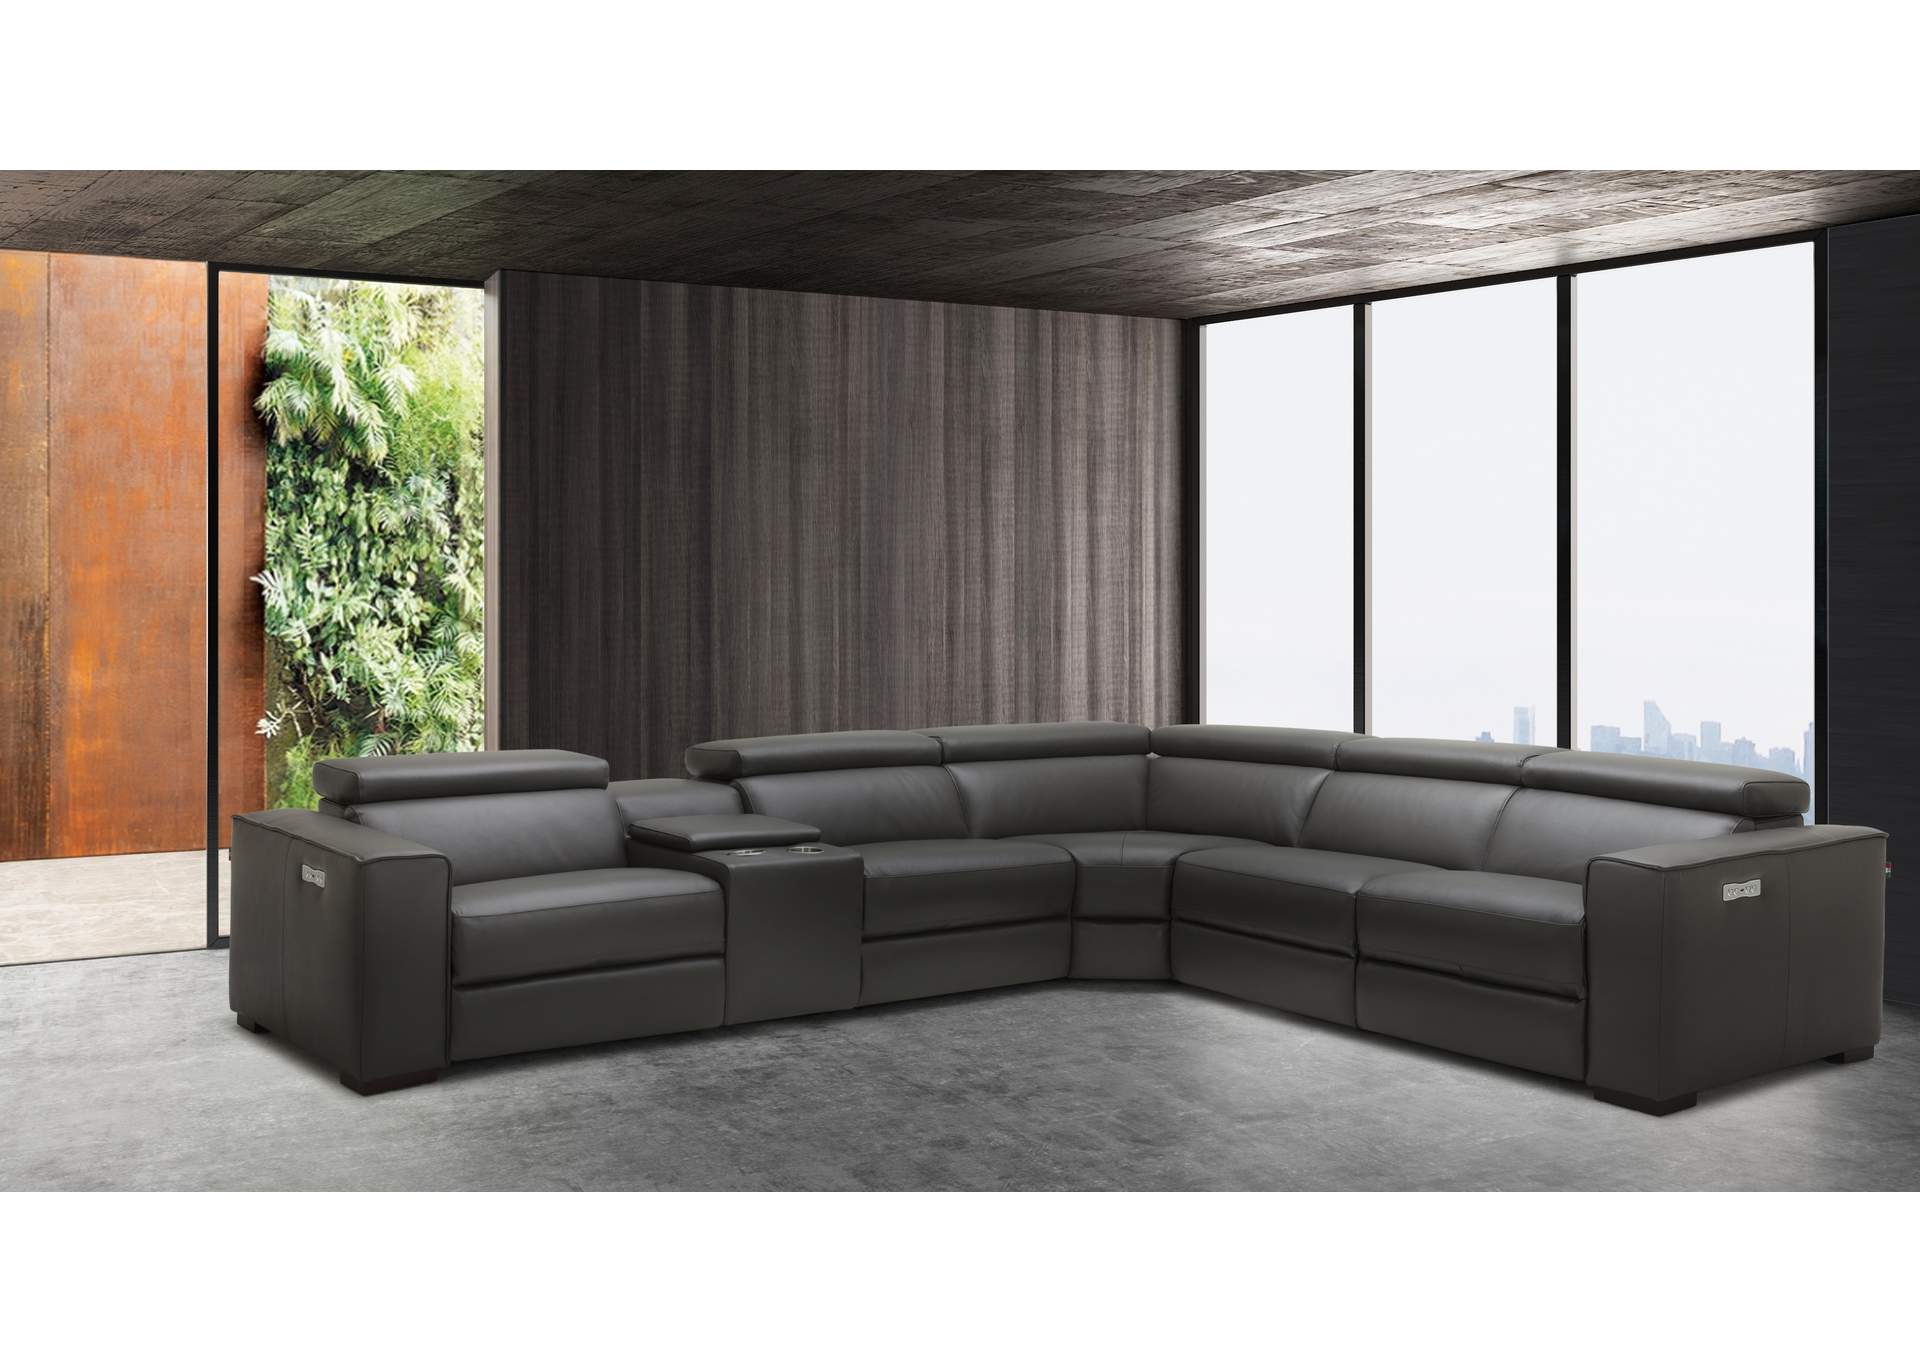 Picasso Motion Sectional In Dark Grey,J&M Furniture